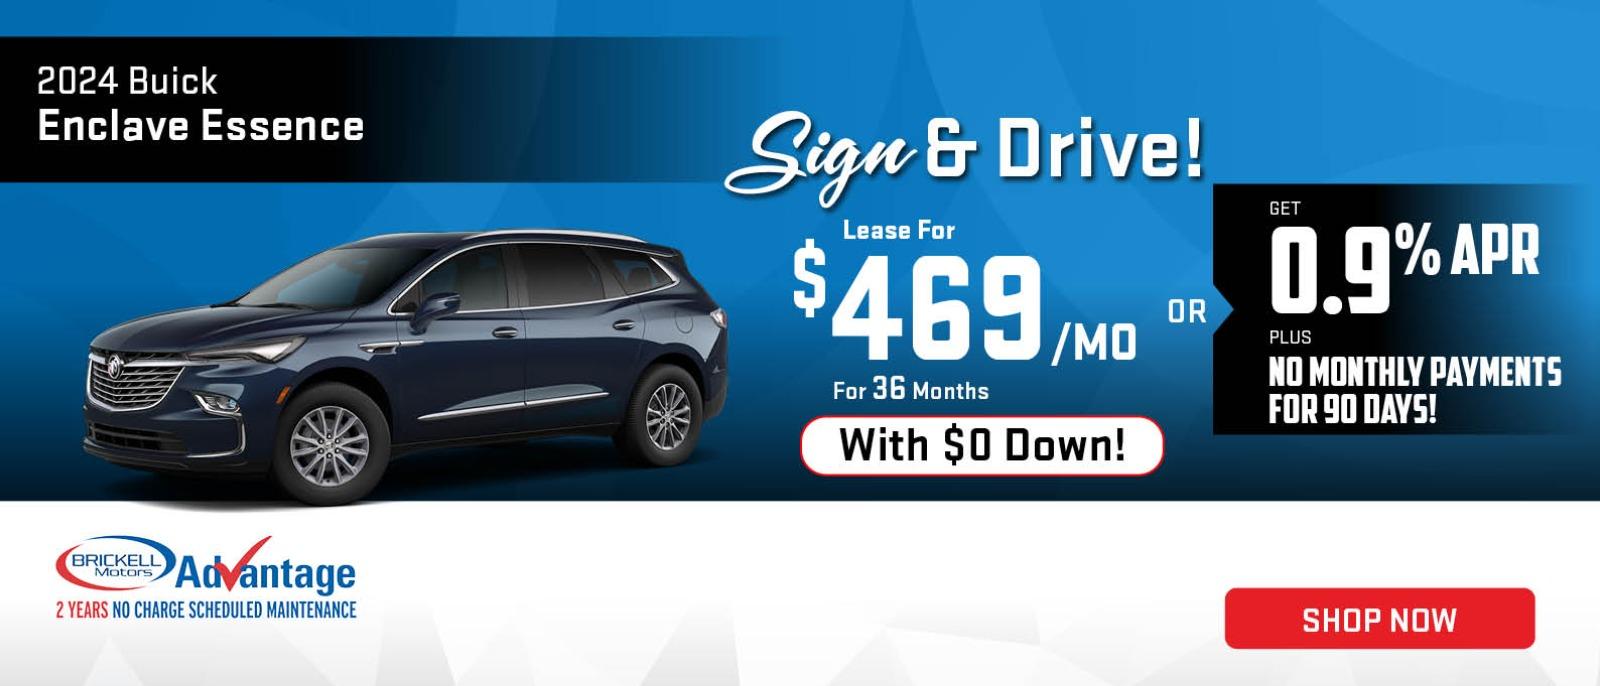 Sign & Drive
Lease for $469 per month for 36 months with $0 down
Or Get 0.9% APR Plus No Monthly Payments for 90 Days!